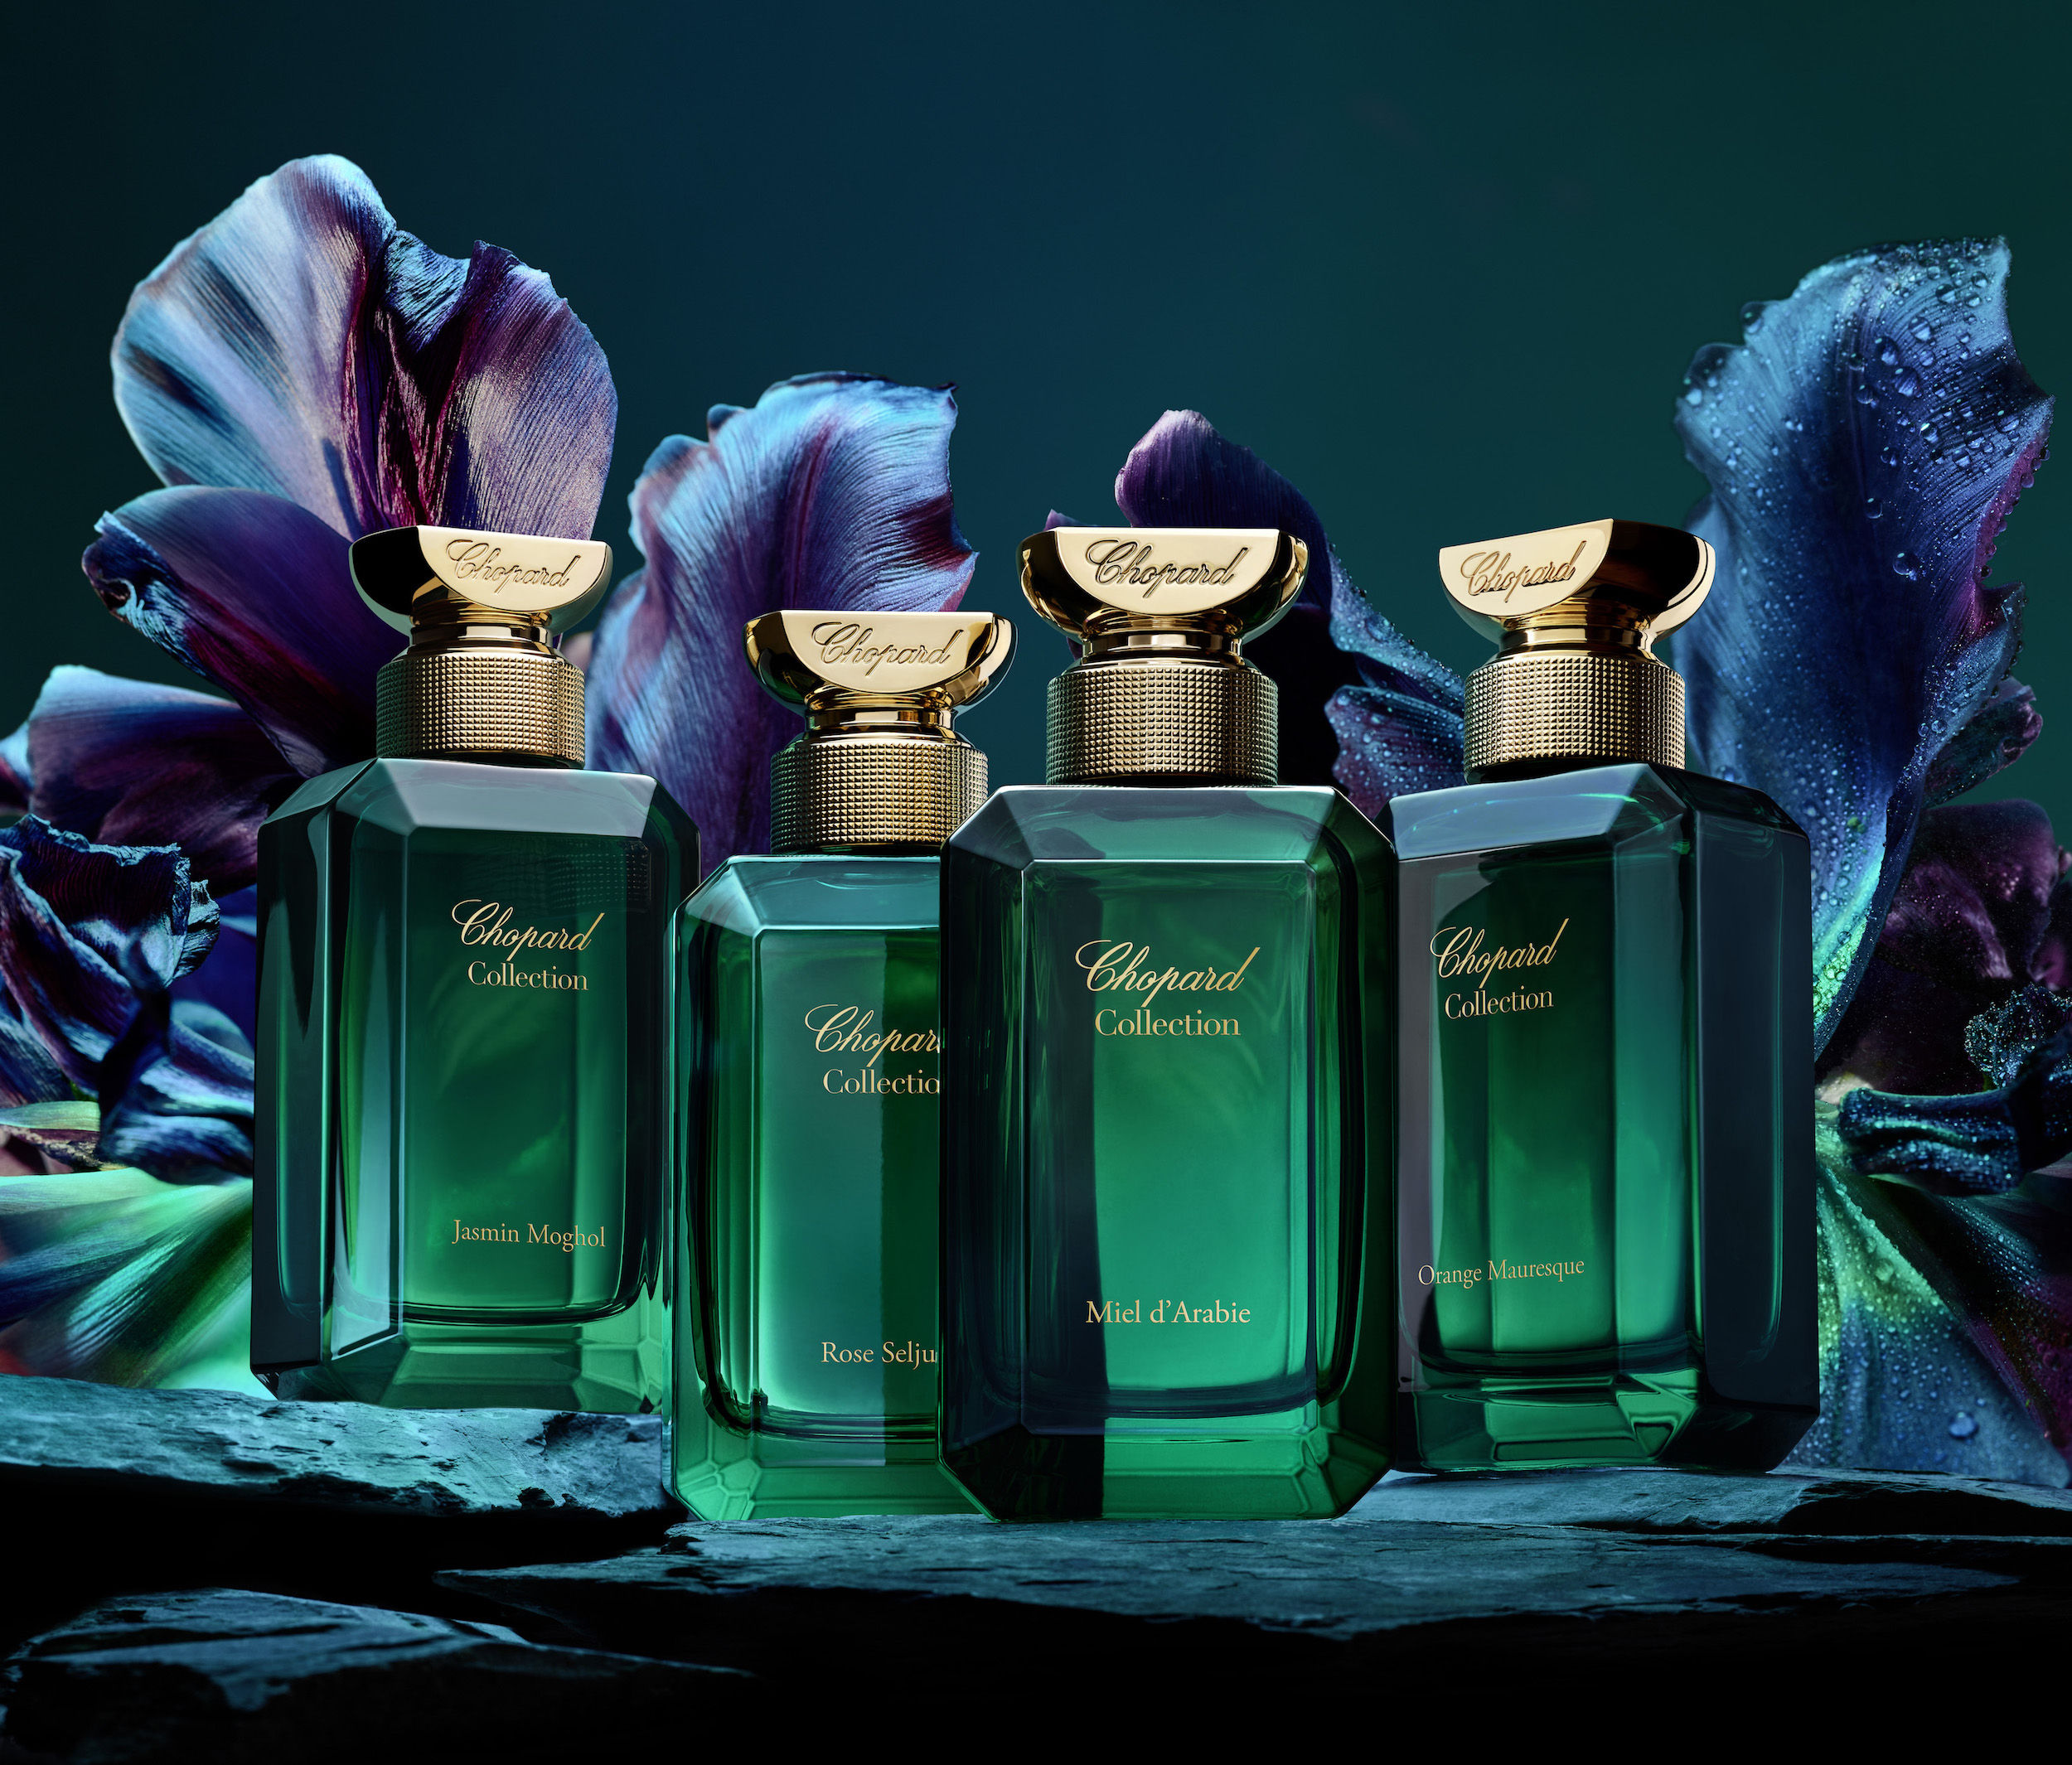 Chopard’s new perfumes chart a move into sustainable perfumery